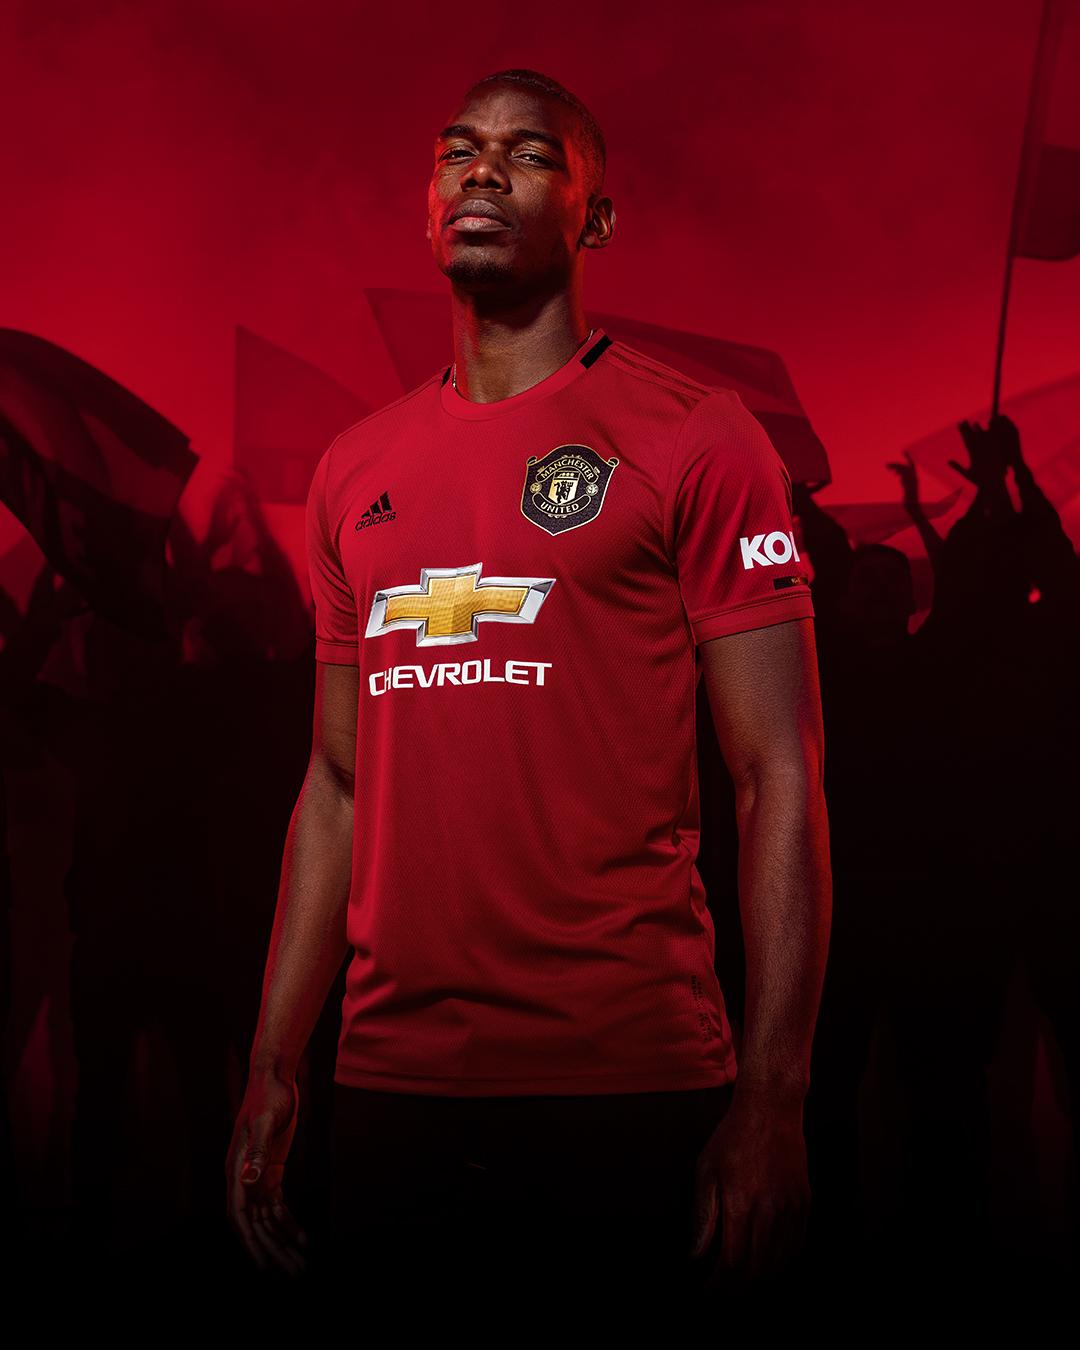 Paul Pogba models the new Manchester Untied home kit (Adidas)